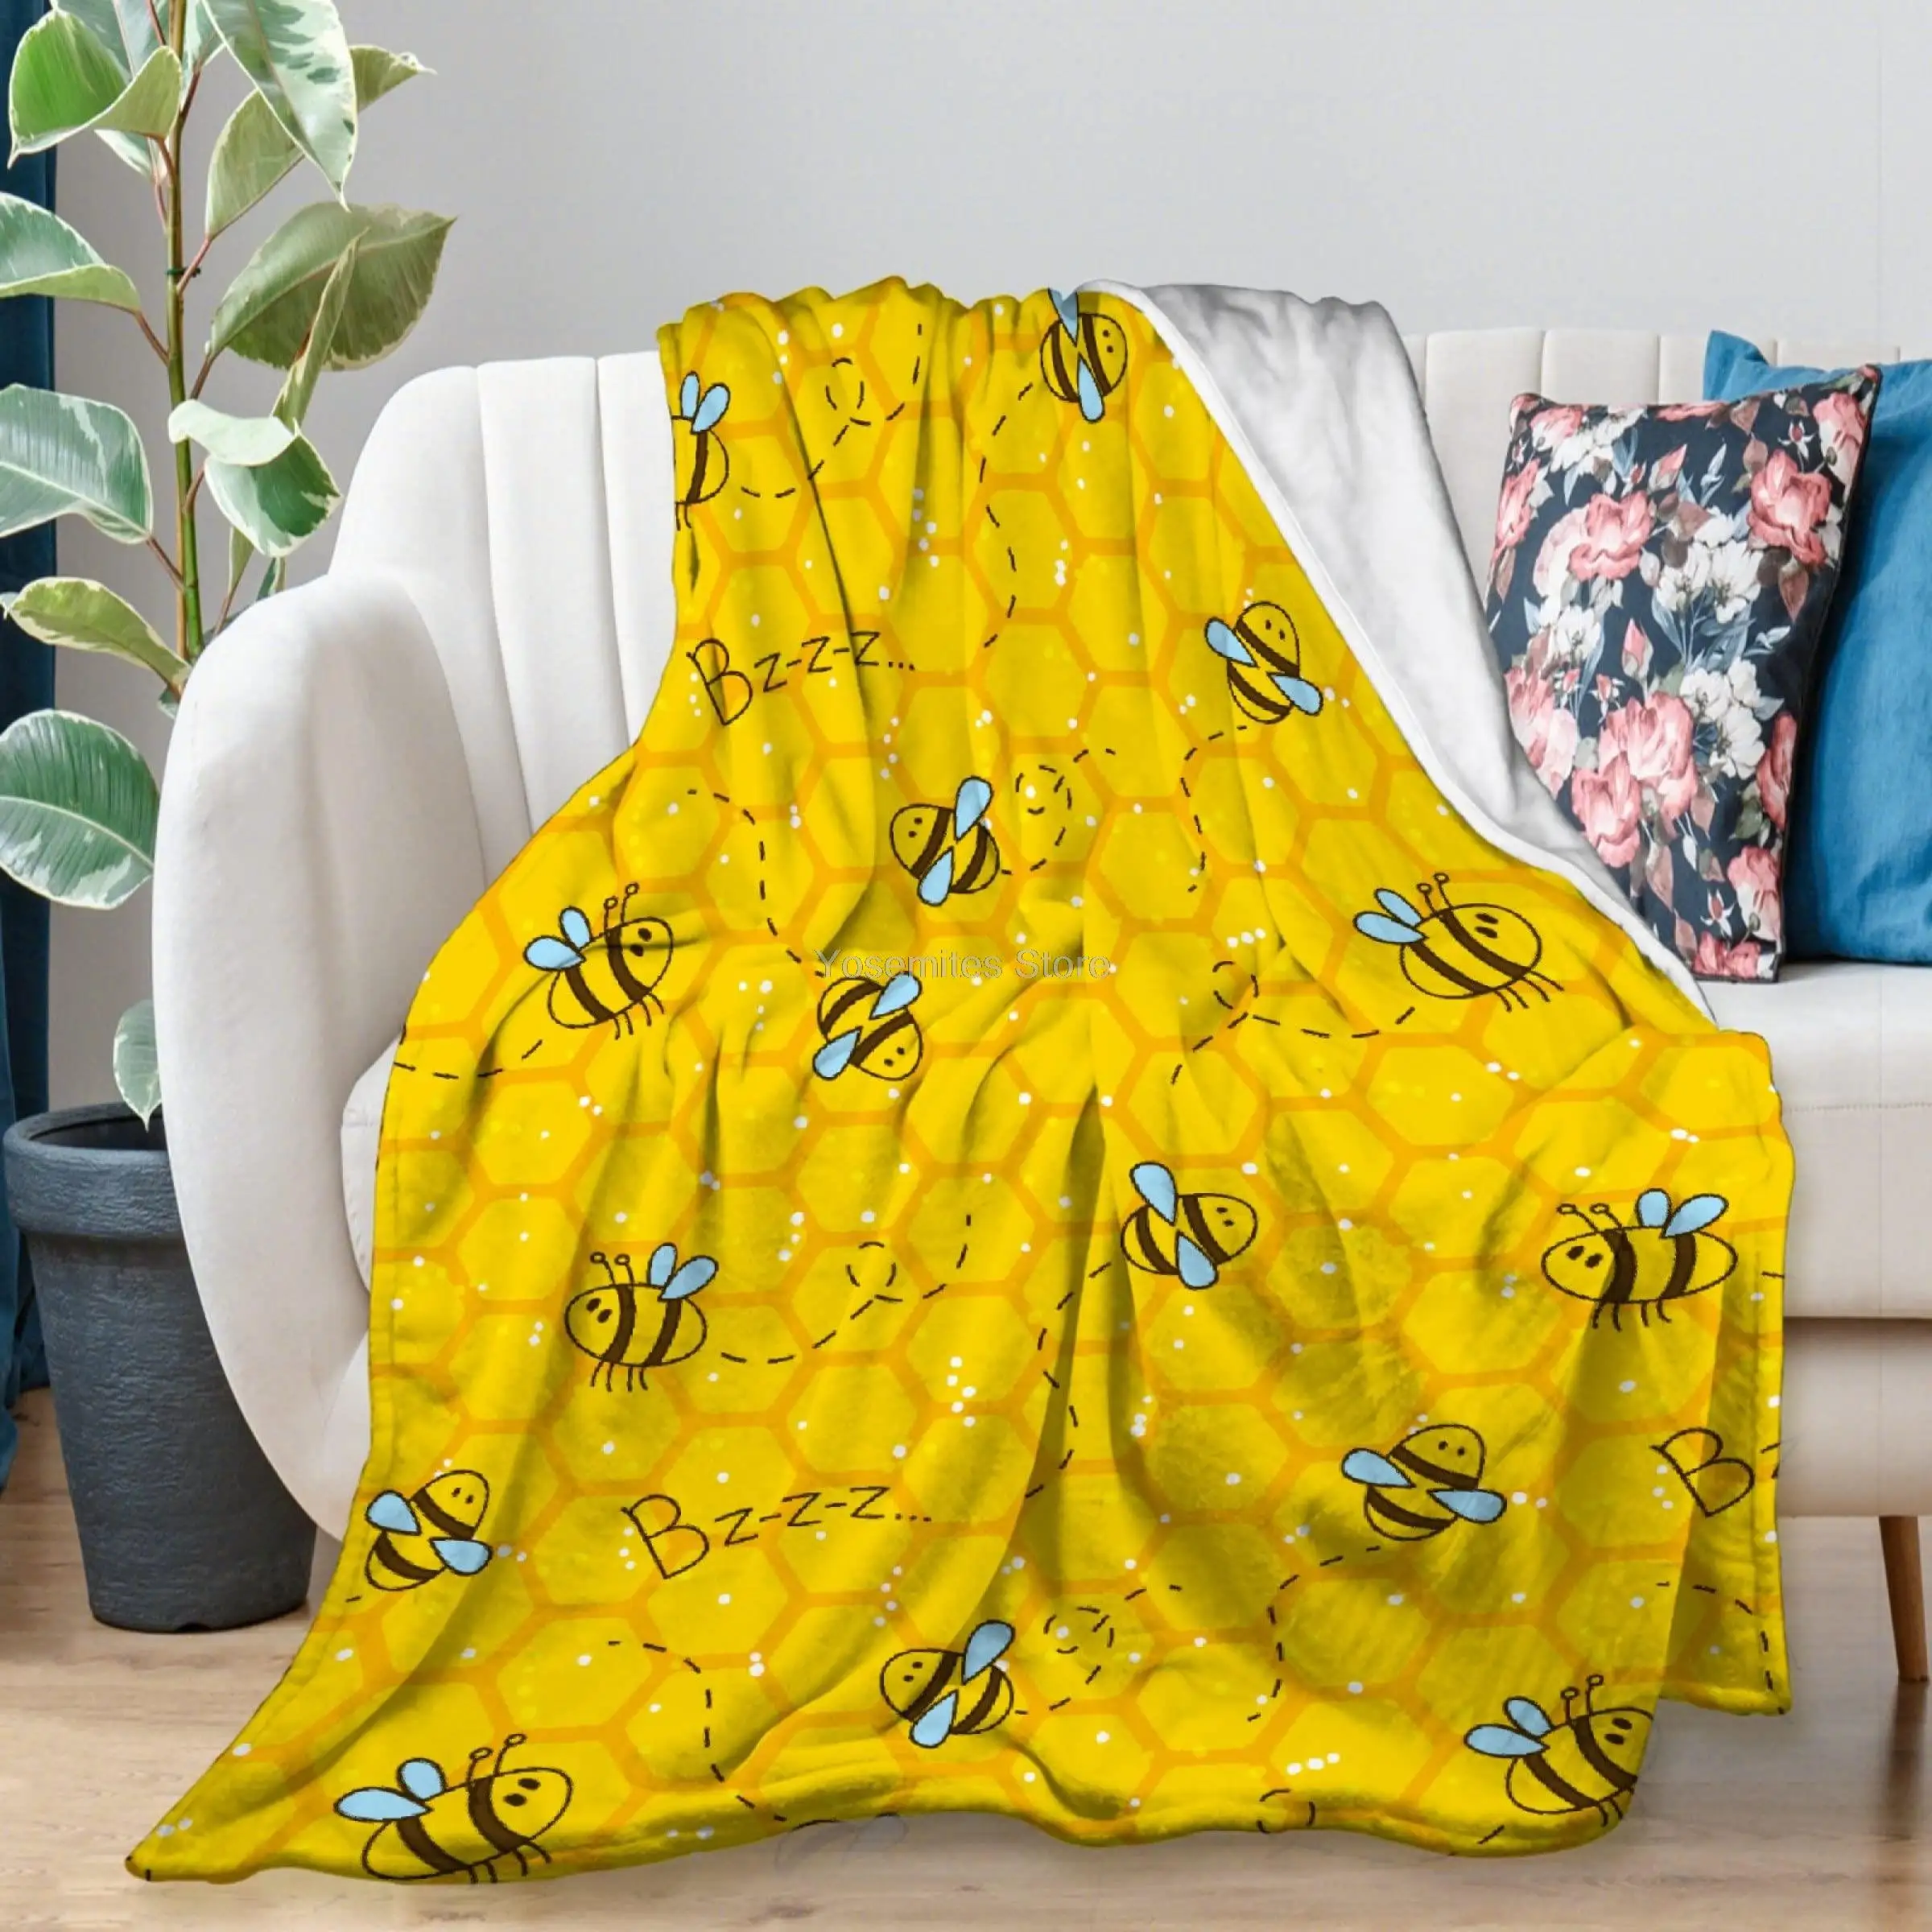 

Yaoola Honeycomb Cute Bee Yellow Flannel Blanket, All Season Soft Cozy Plush Bed Throw fit Bedroom Living Room Sofa Couch Beddin